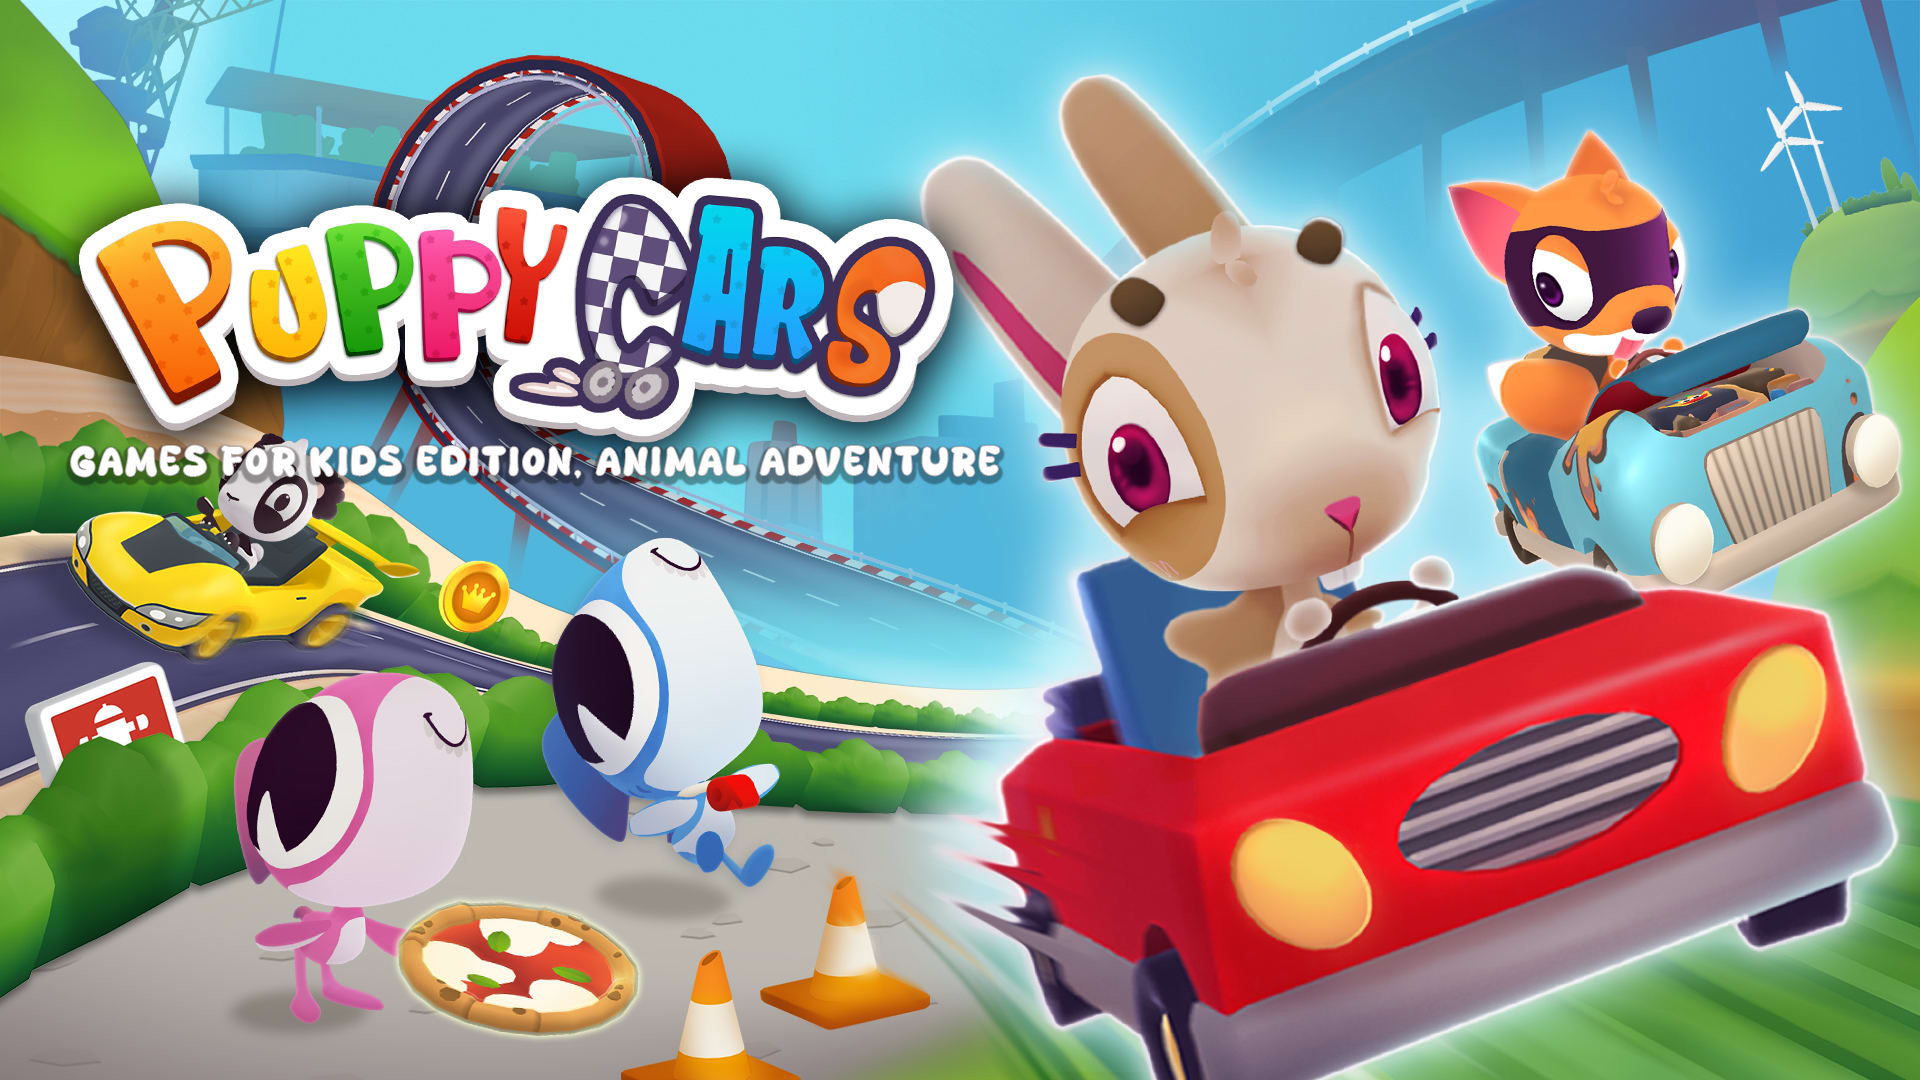 Puppy Cars: Games for Kids Edition, Animal adventure